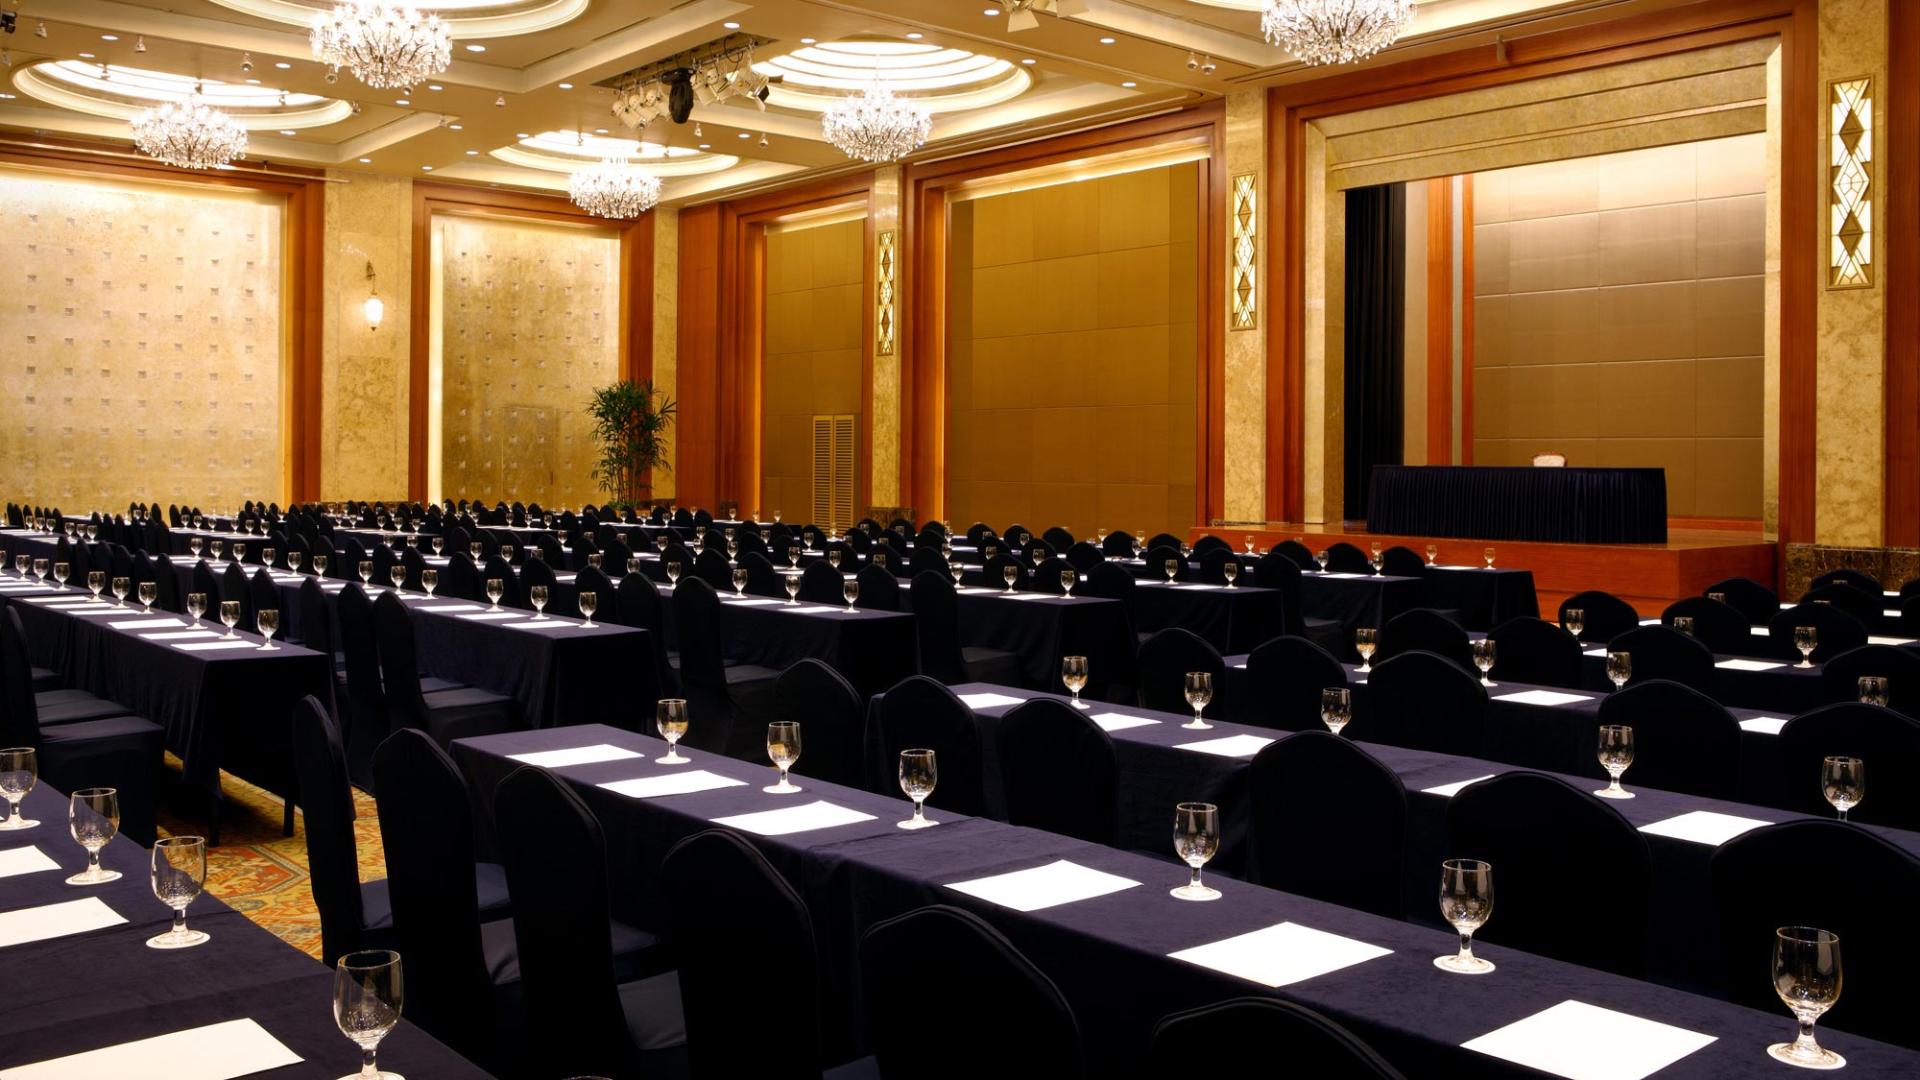 Lotte Hotel Seoul-Wedding&Conference-Conference-Crystal Ballroom